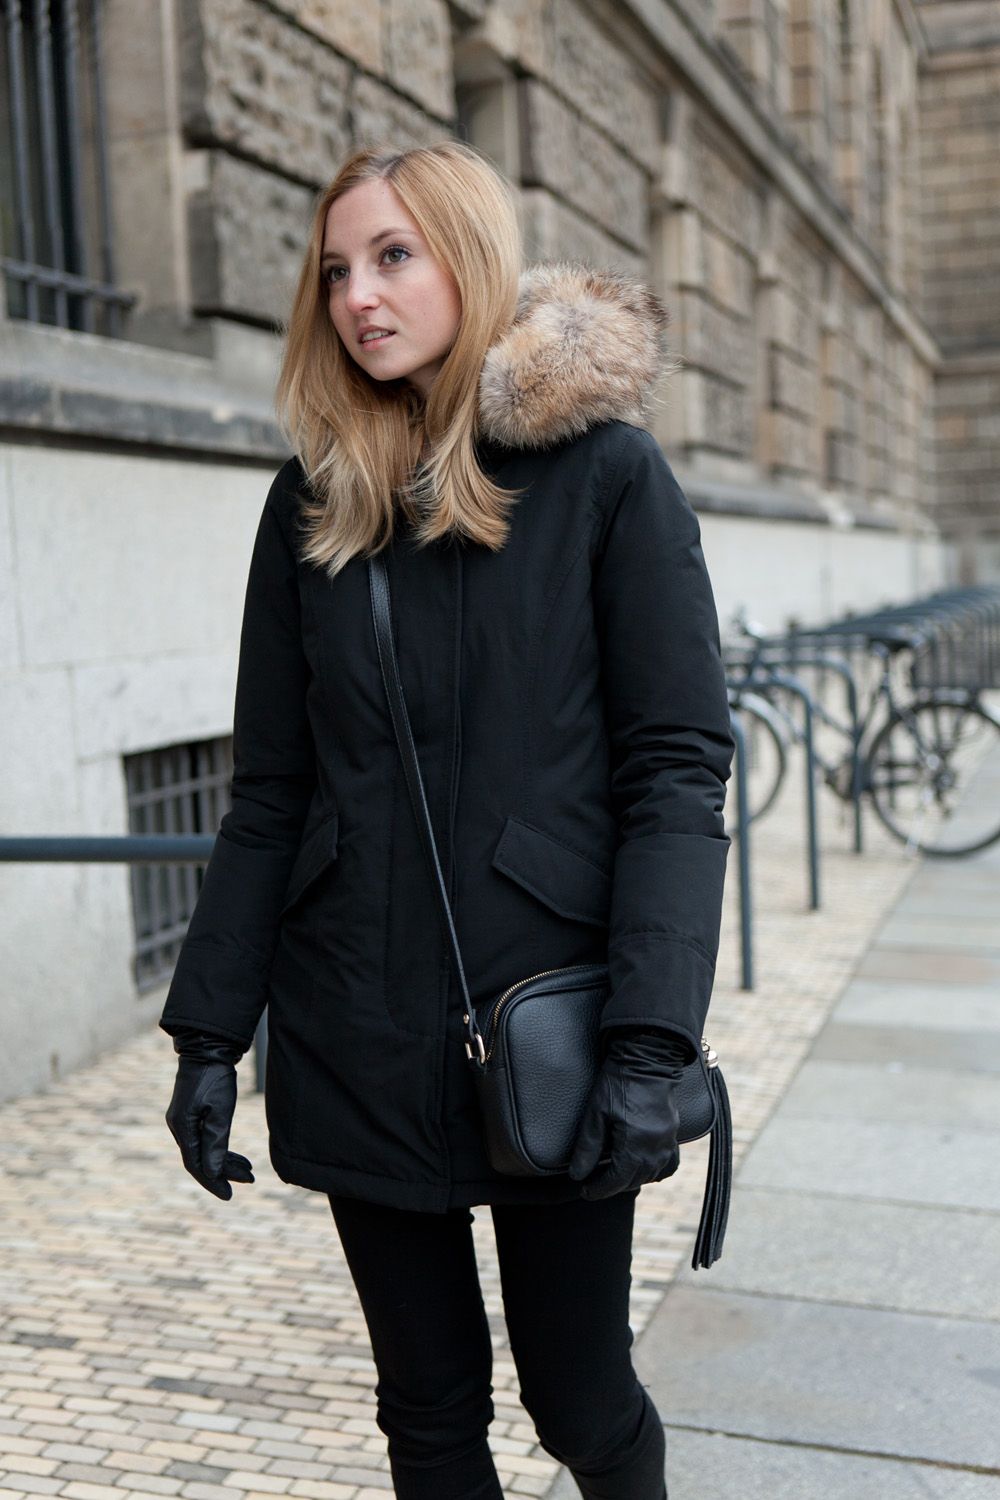 How to Wear Black Parka Jacket: Top 13 Stylish Outfit Ideas for Women